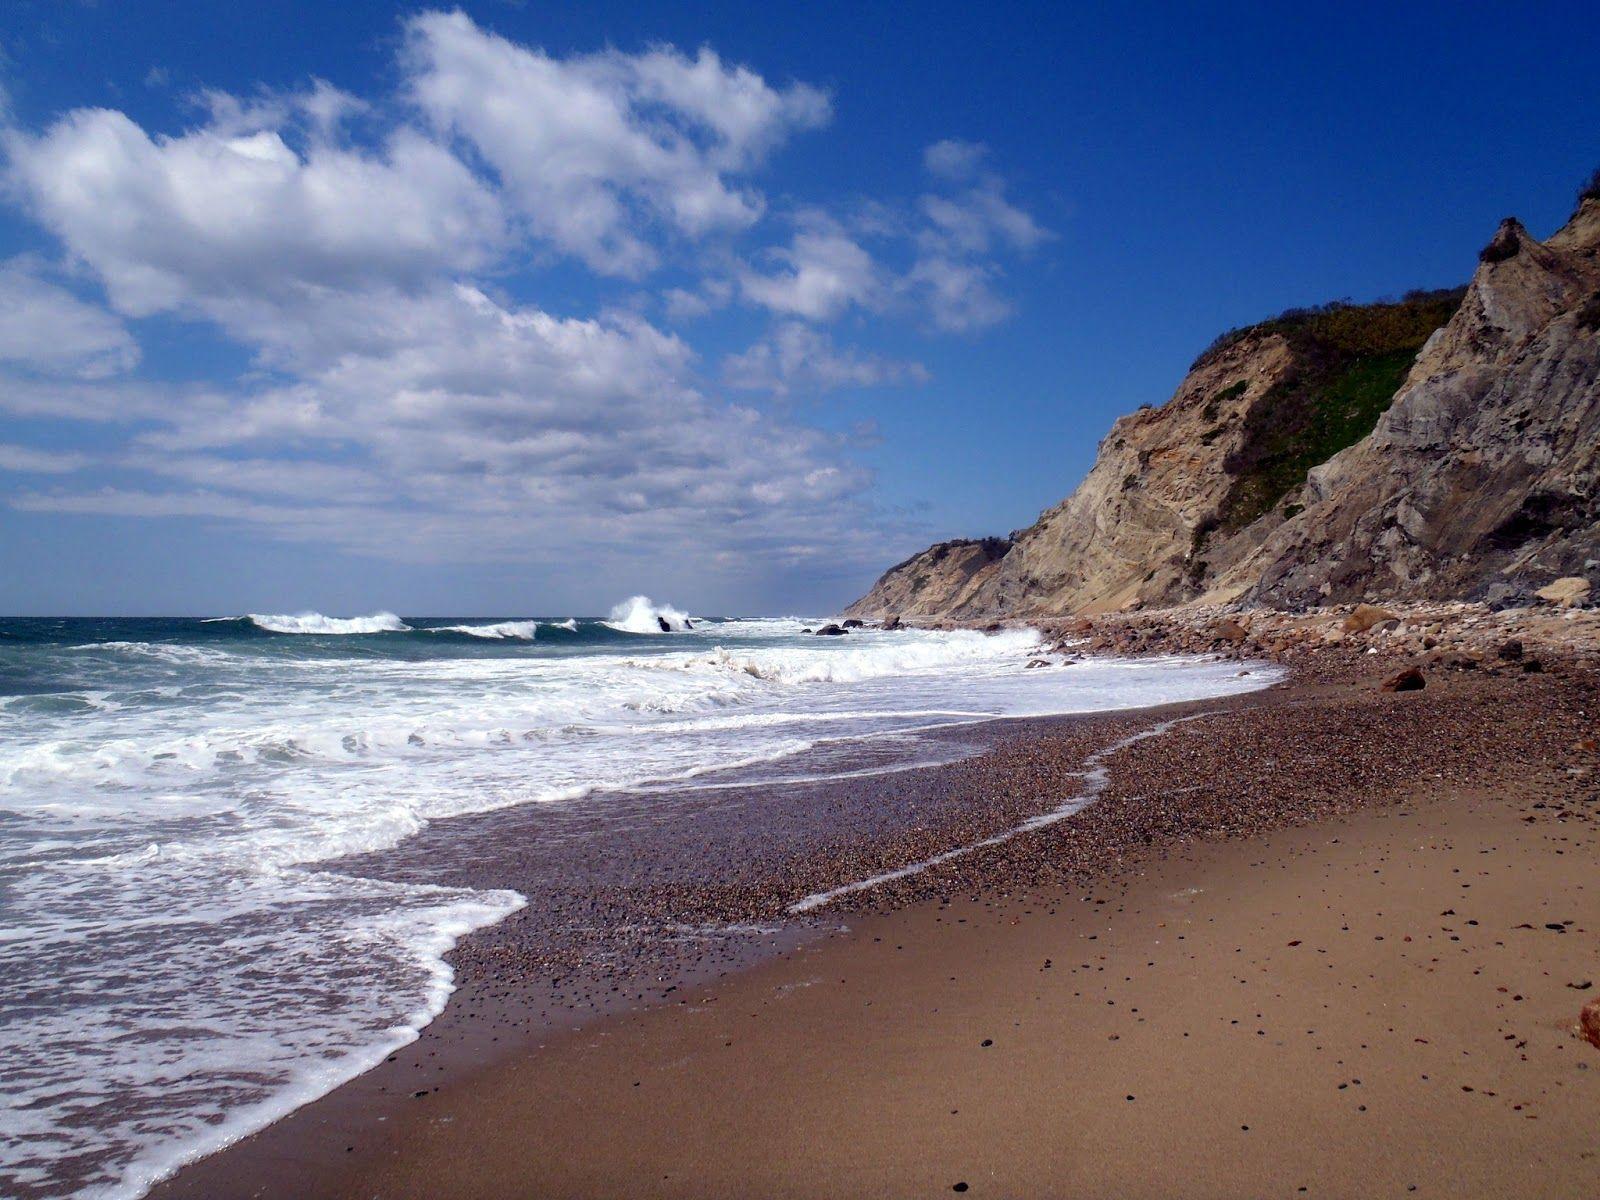 Block Island is a secluded little island 10 miles south of the coast